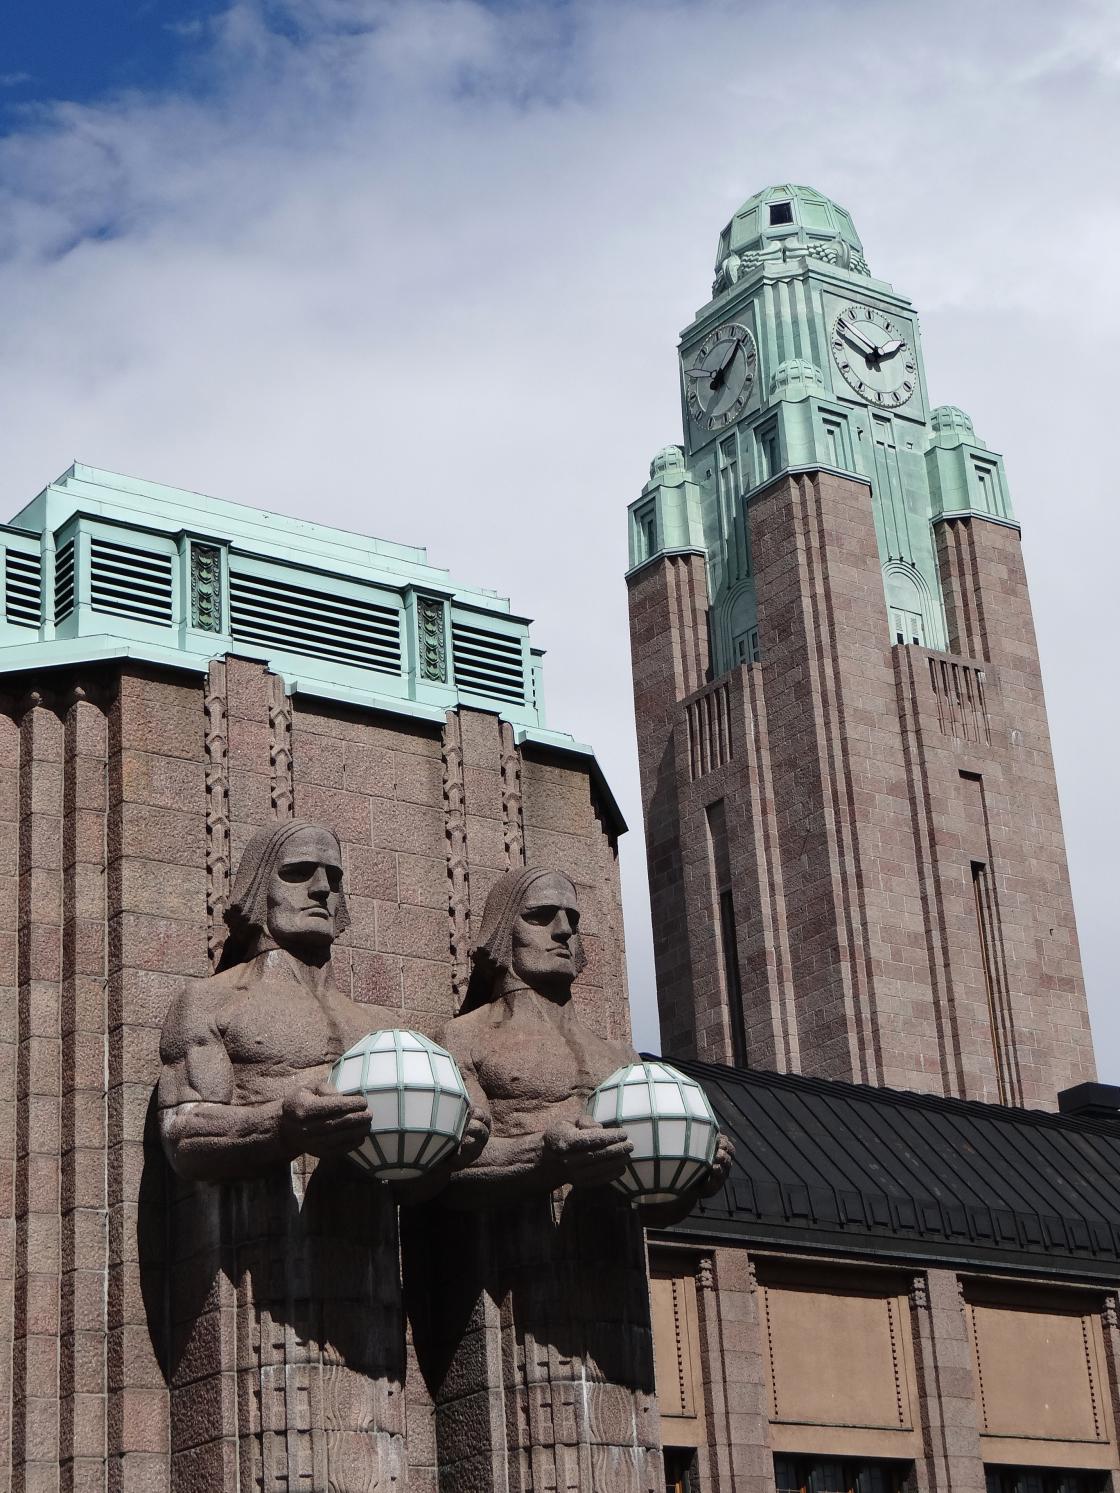 Photograph of a detail of Helsinki Central Station